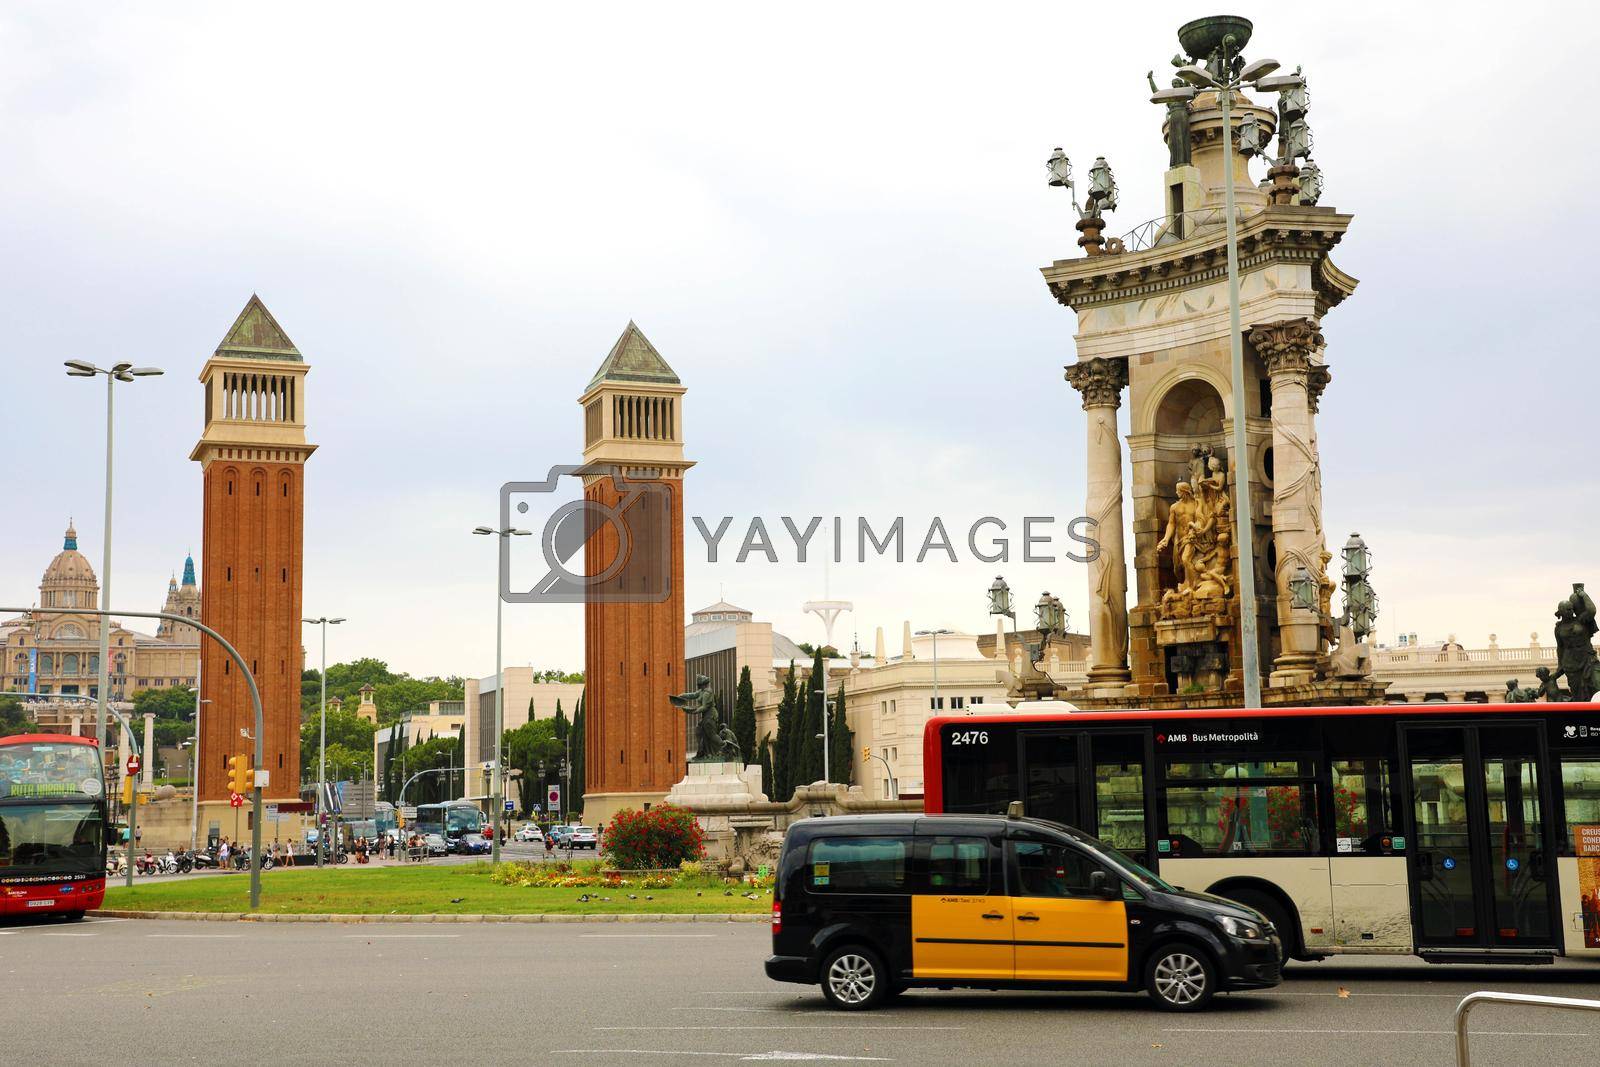 BARCELONA, SPAIN - JULY 13, 2018: Venetian towers in Placa d'Espanya square and the fountain with traffic cars, Catalonia, Spain